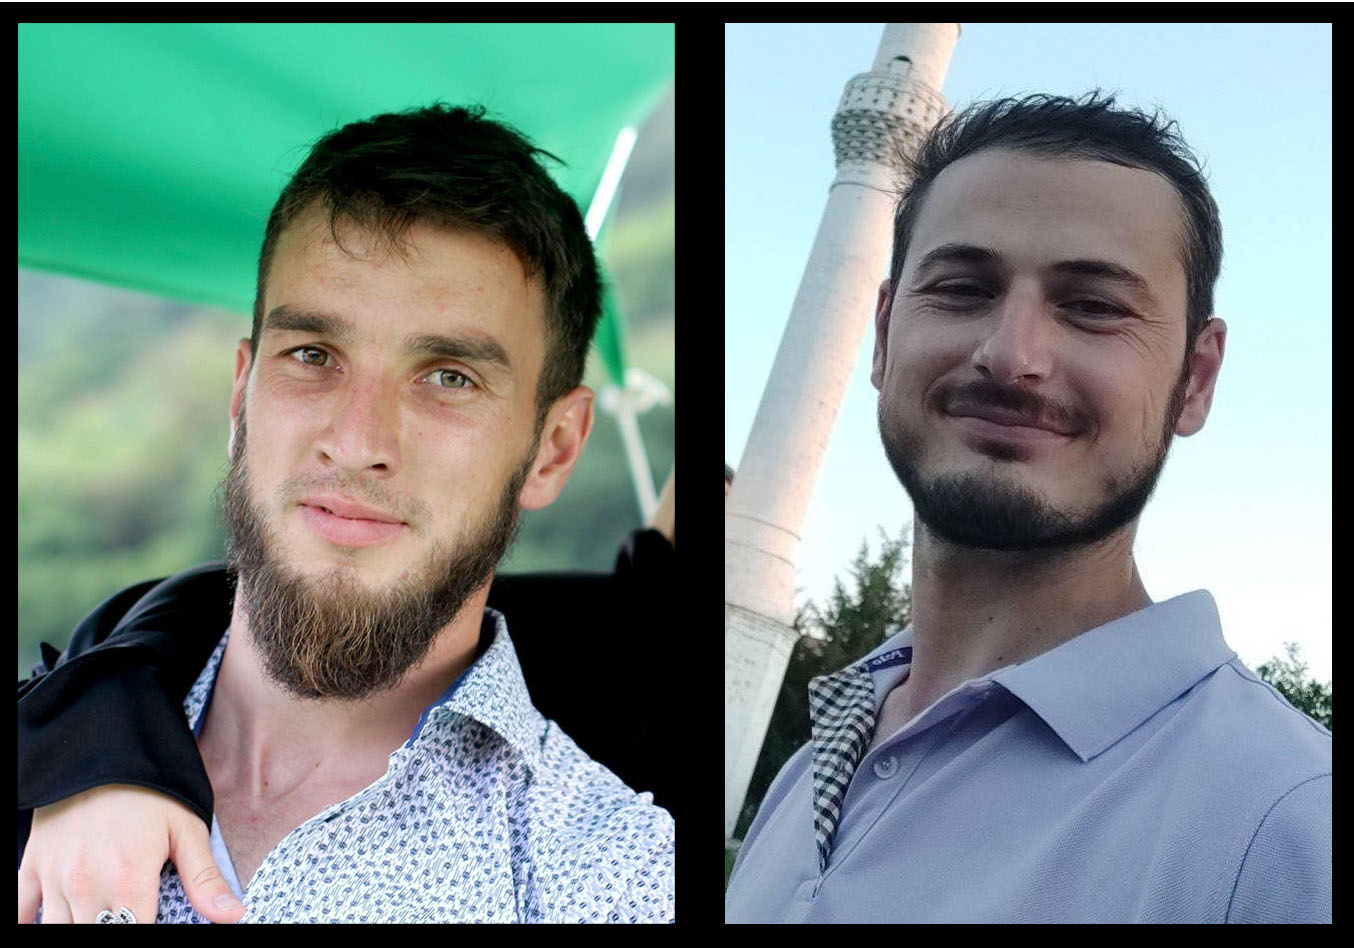 Russia holding Crimean journalists Rustem Osmanov and Aziz Azizov for 2 months on terror charges - Committee to Protect Journalists